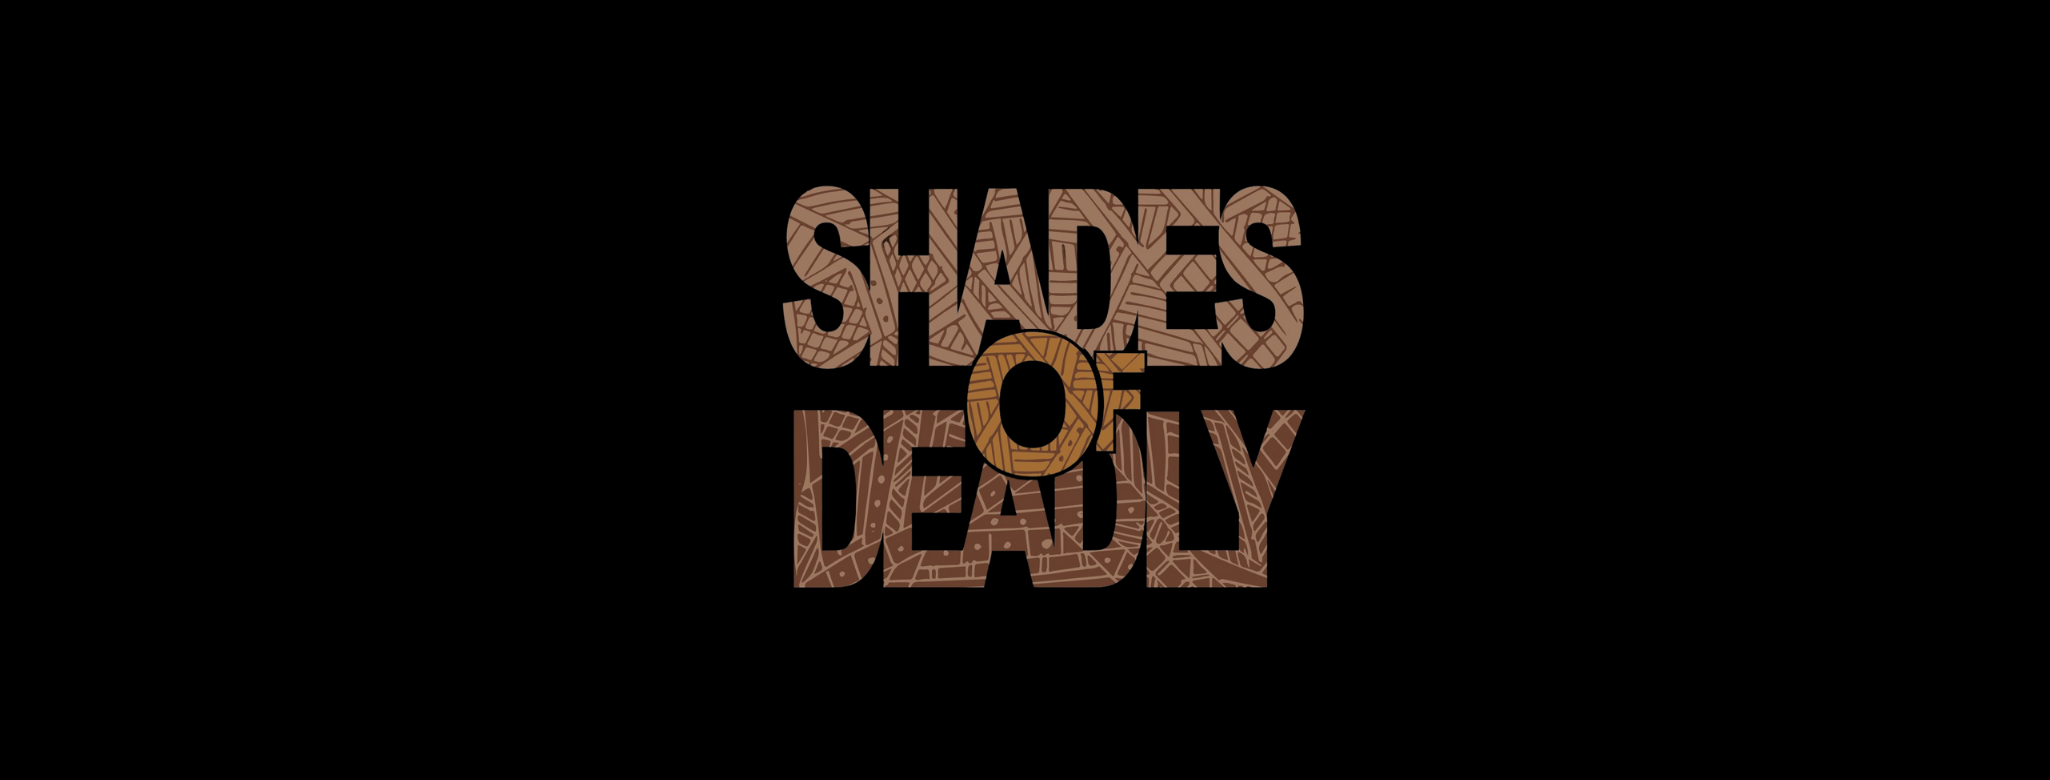 Shades of Deadly